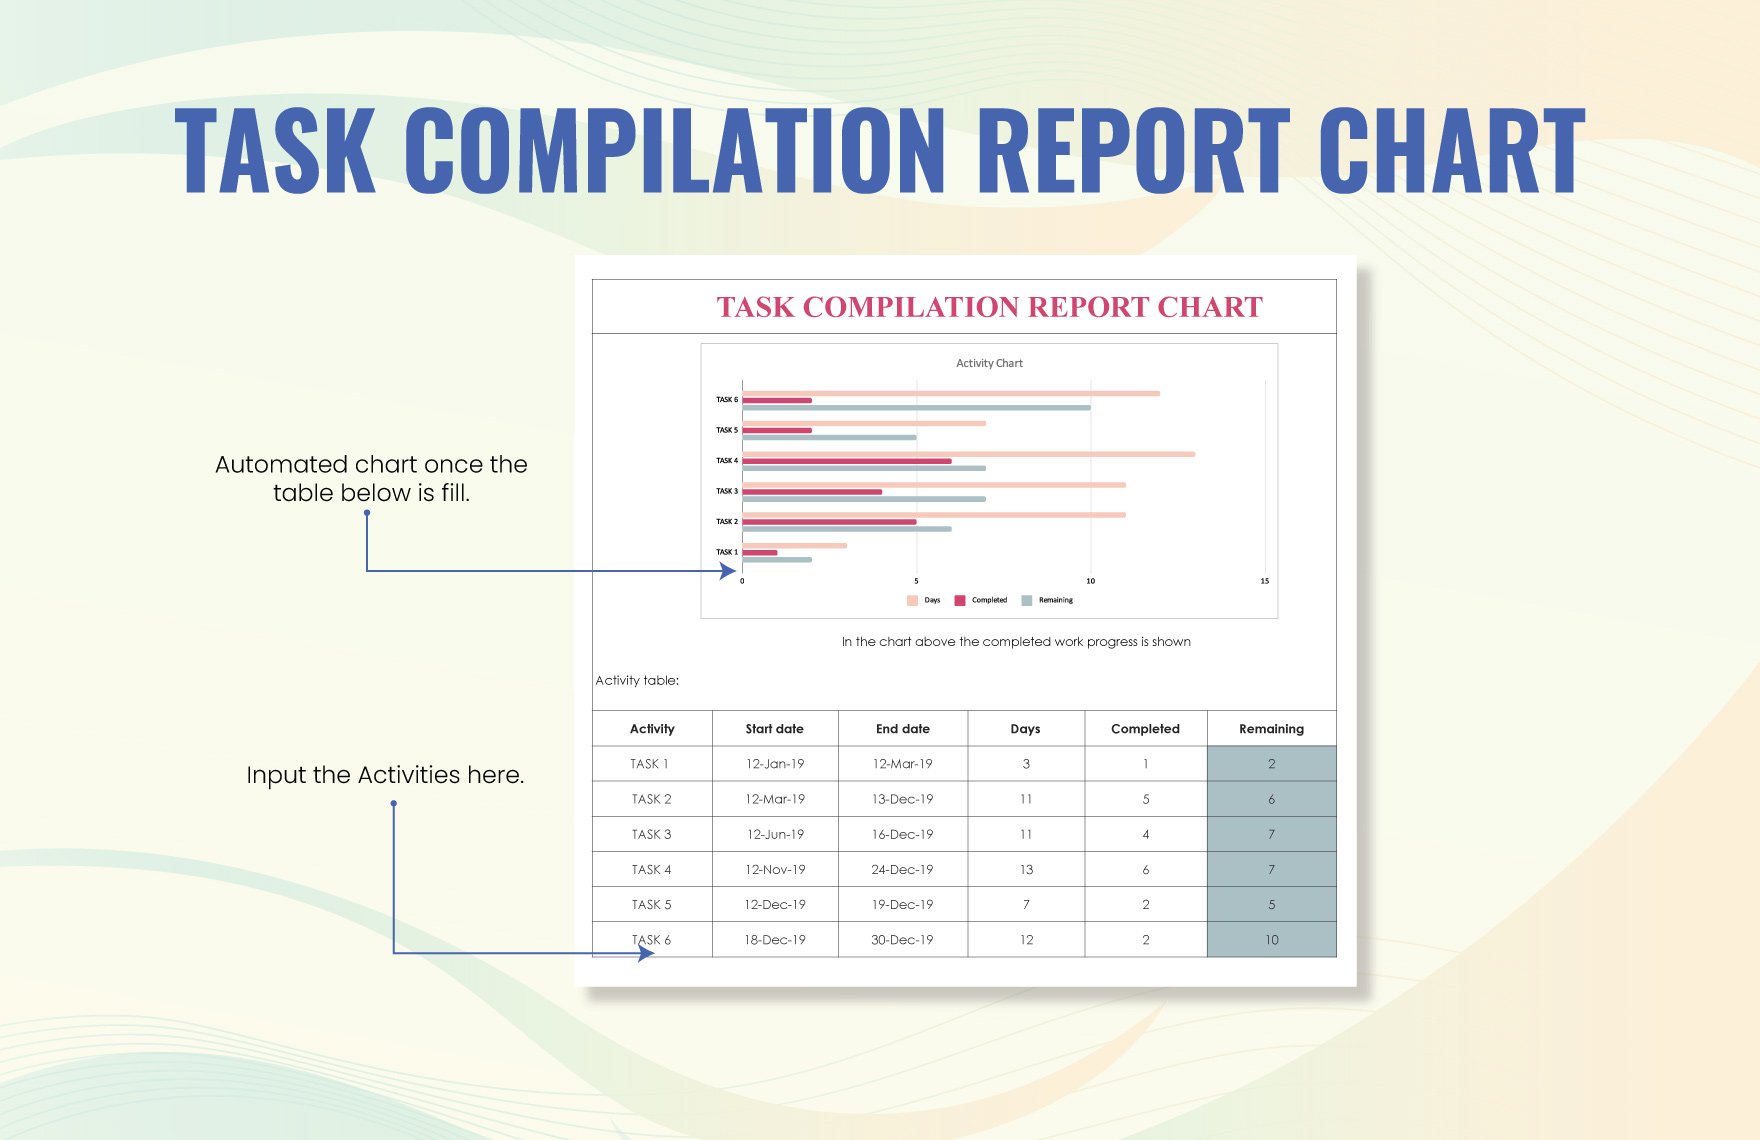 Task Compilation Report Chart Template